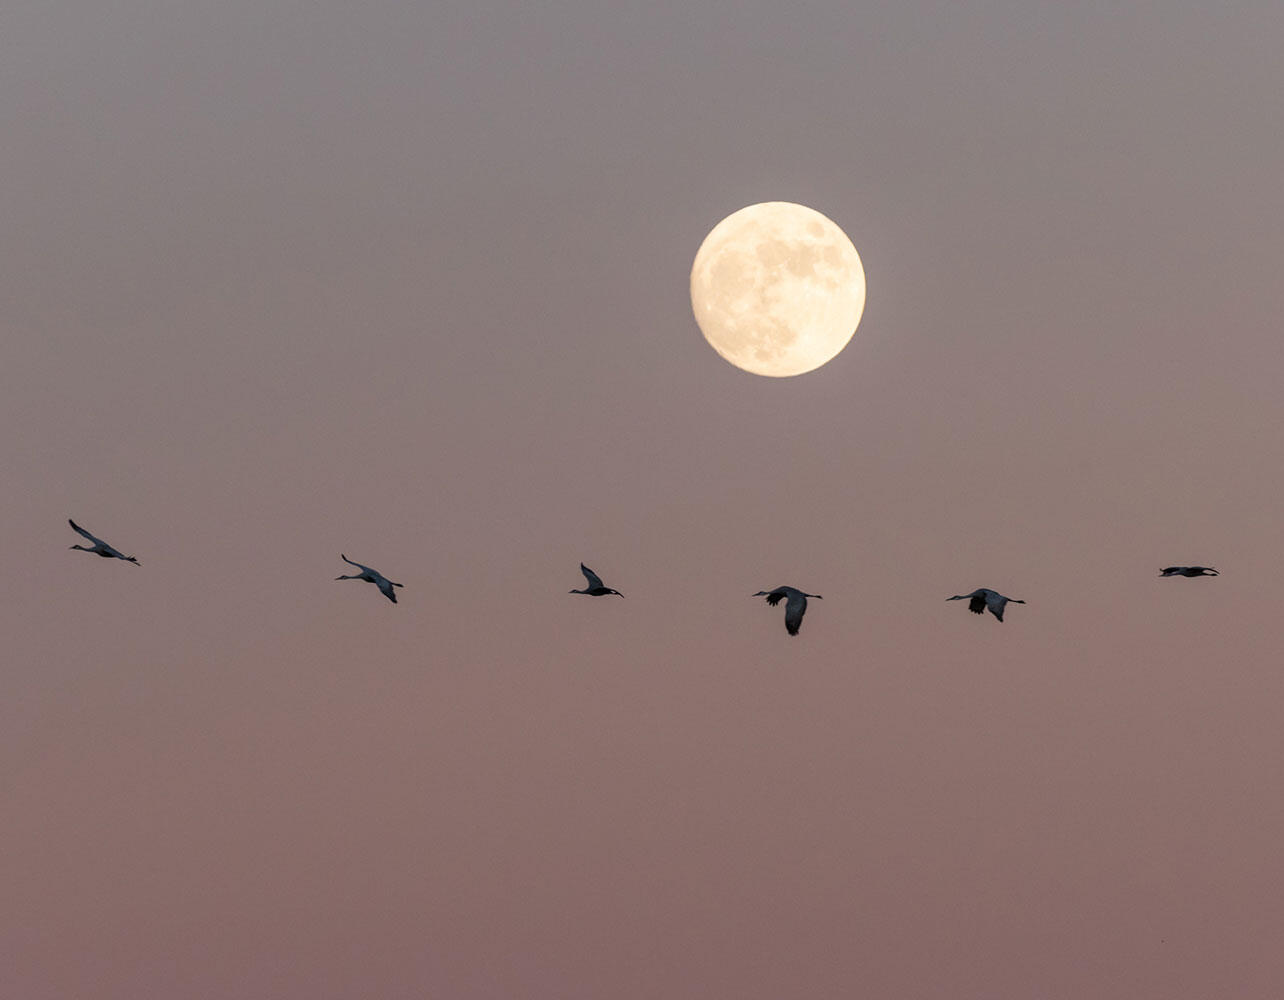 Sandhill Cranes in flight. A full moon is in the background.